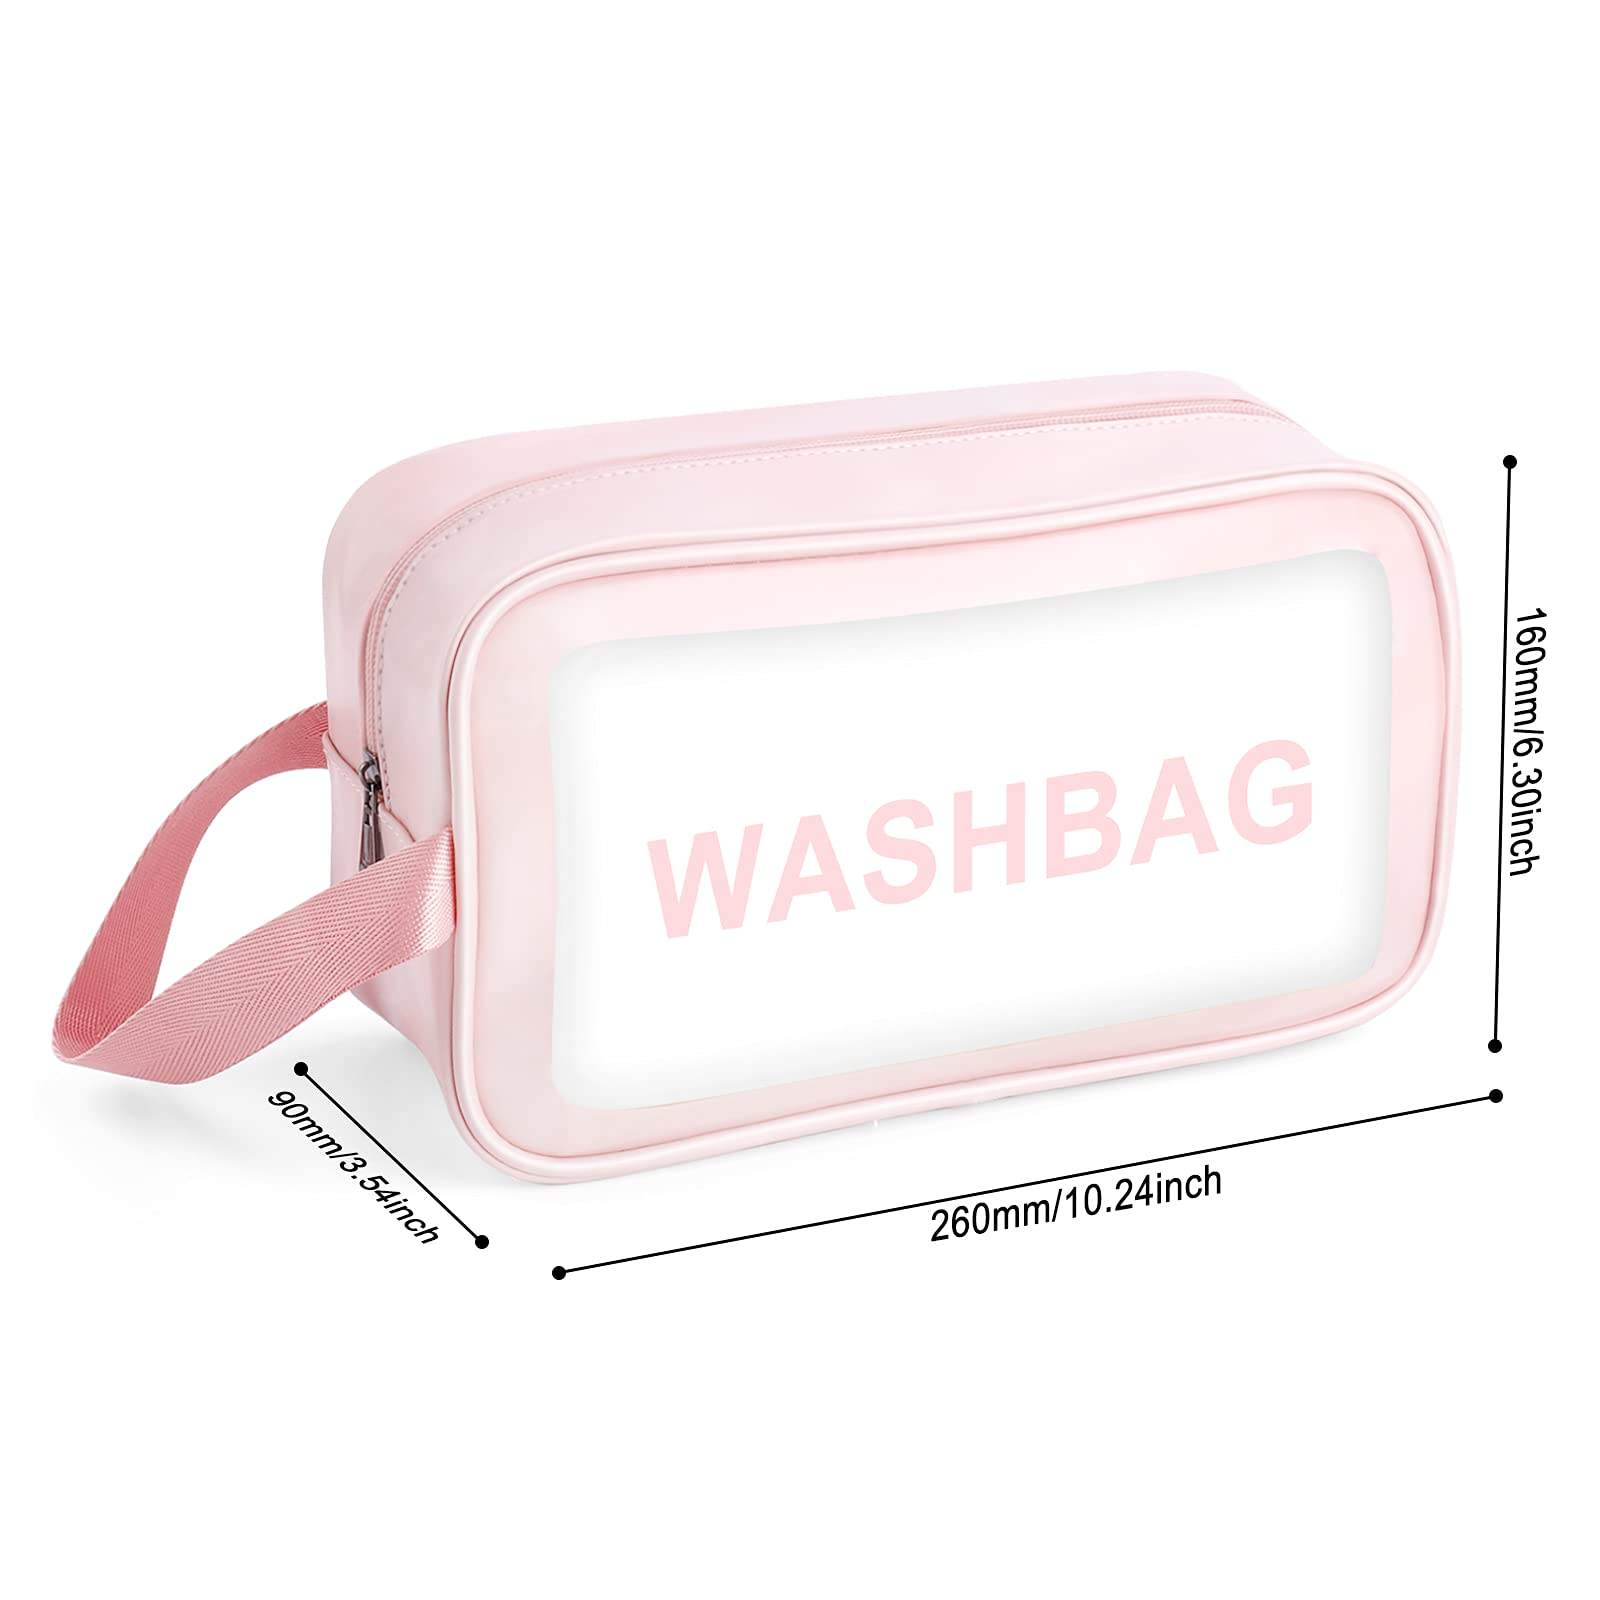 Clear Toiletry Bag PVC Wash Bag Product Details